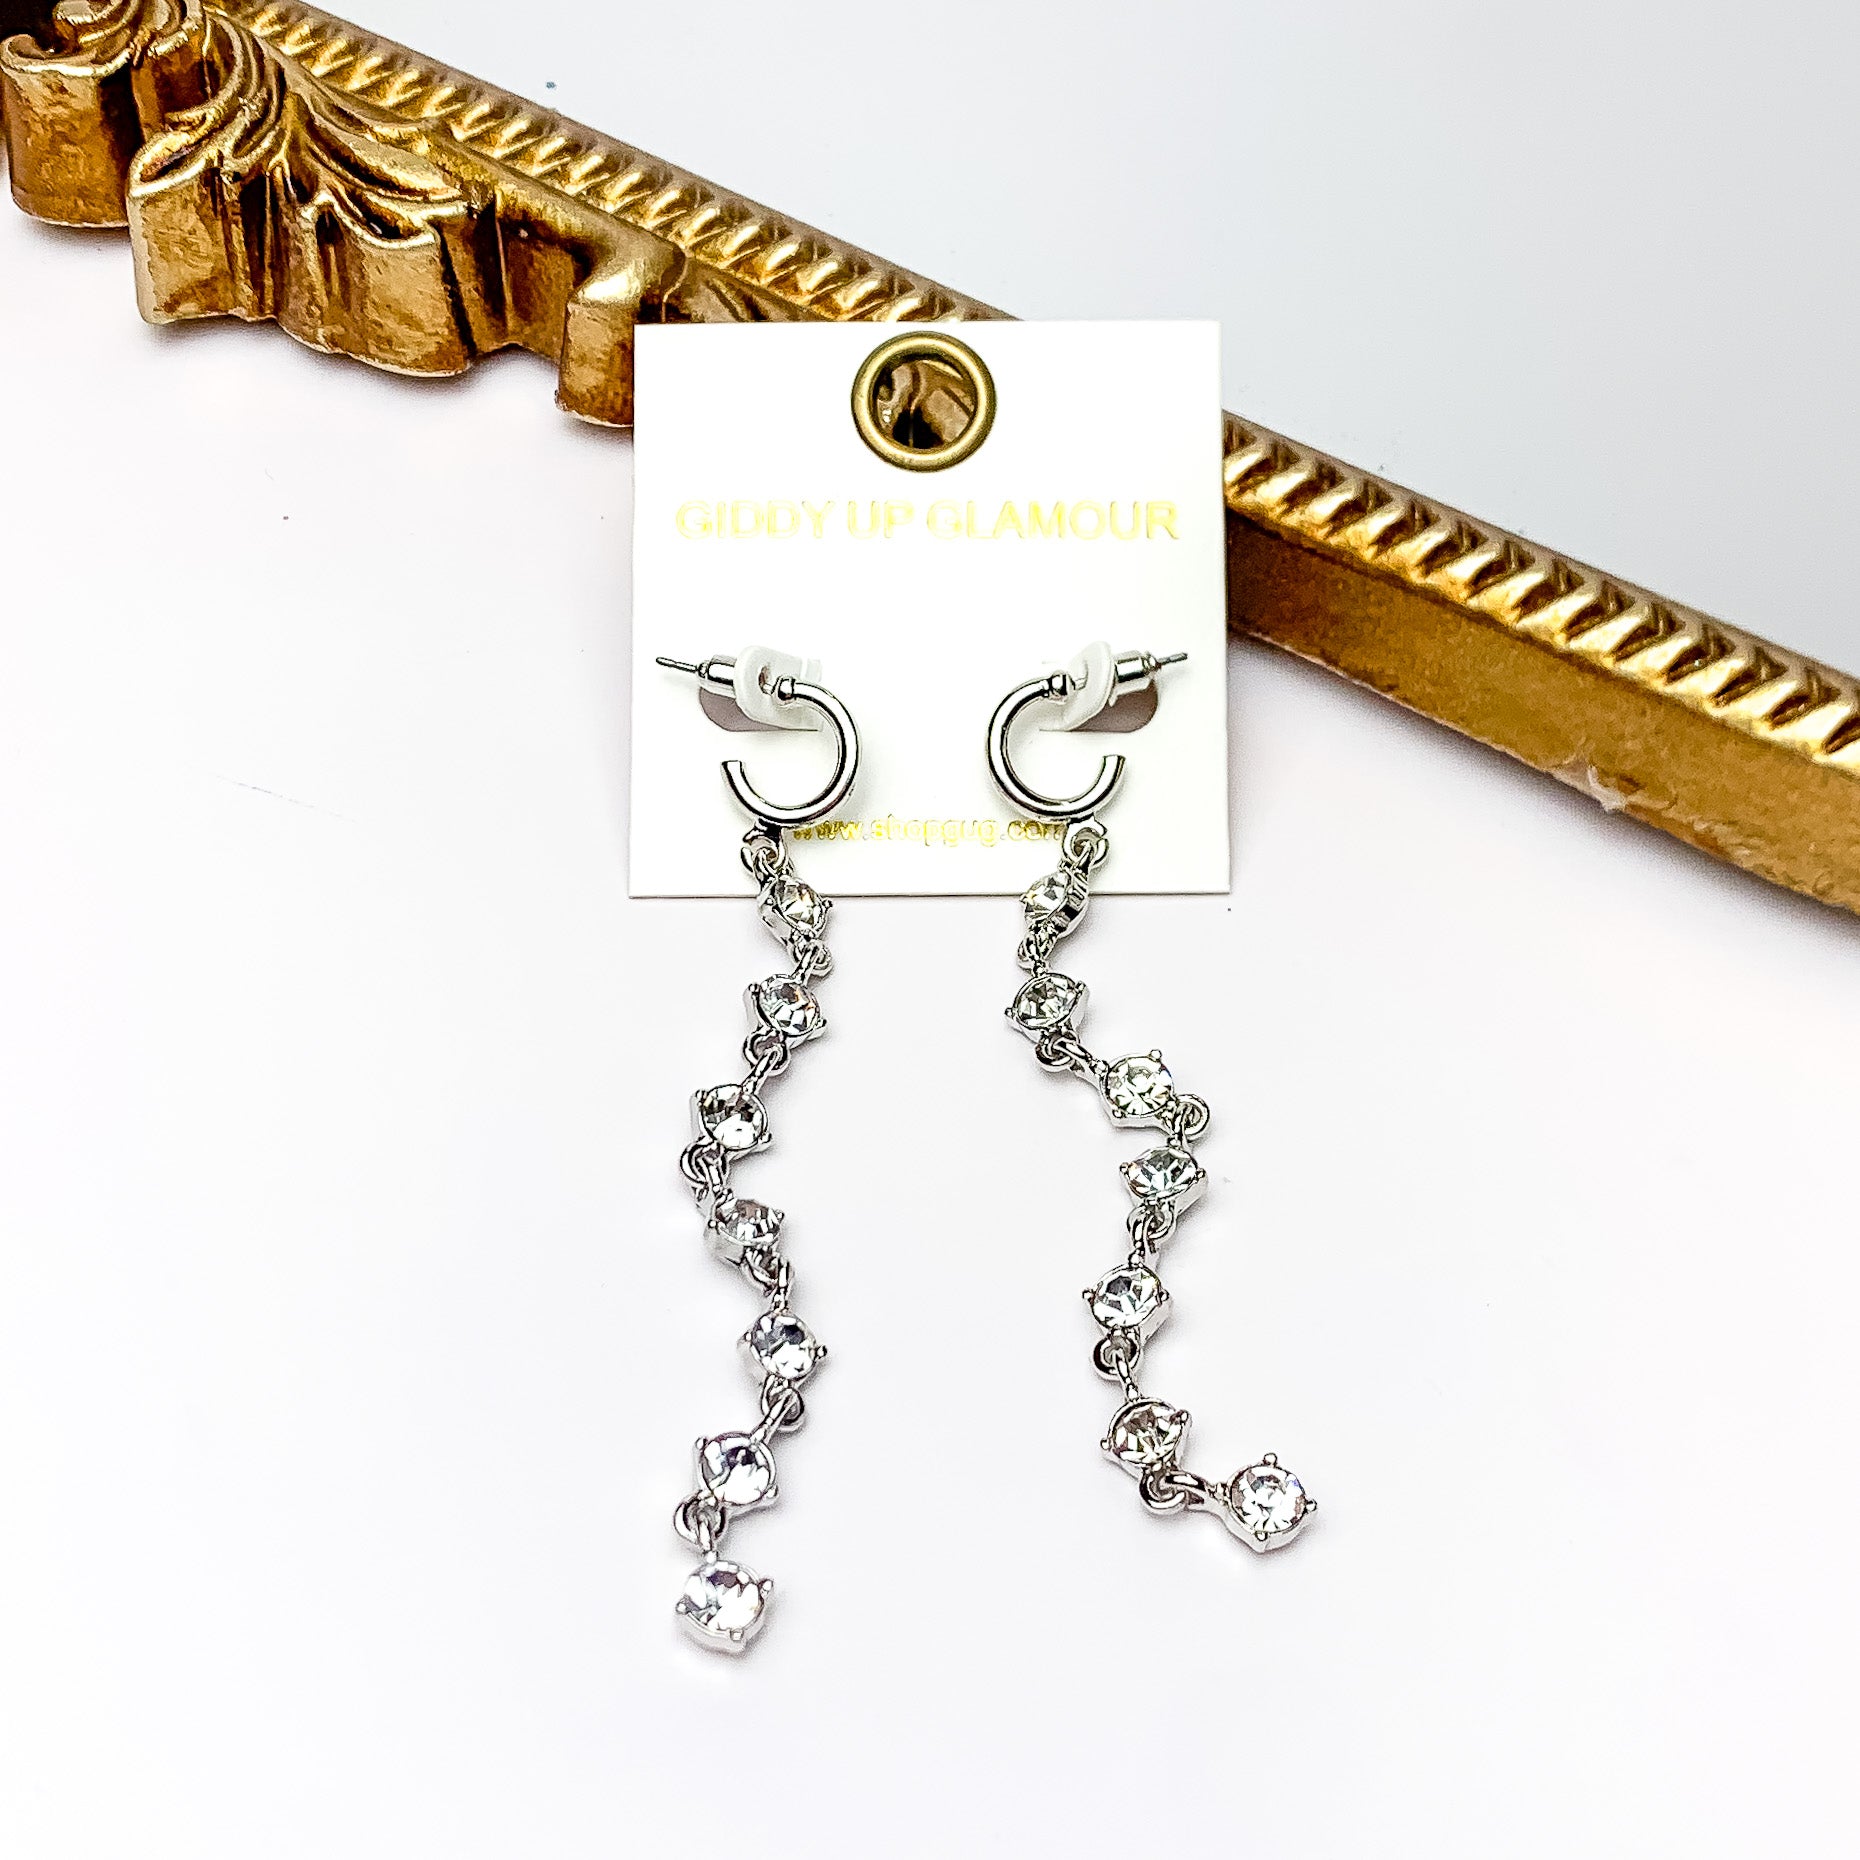 Red Carpet Moment Long Silver Tone Earrings With Clear Crystals. Pictured on a white background with a gold frame behind the earrings.